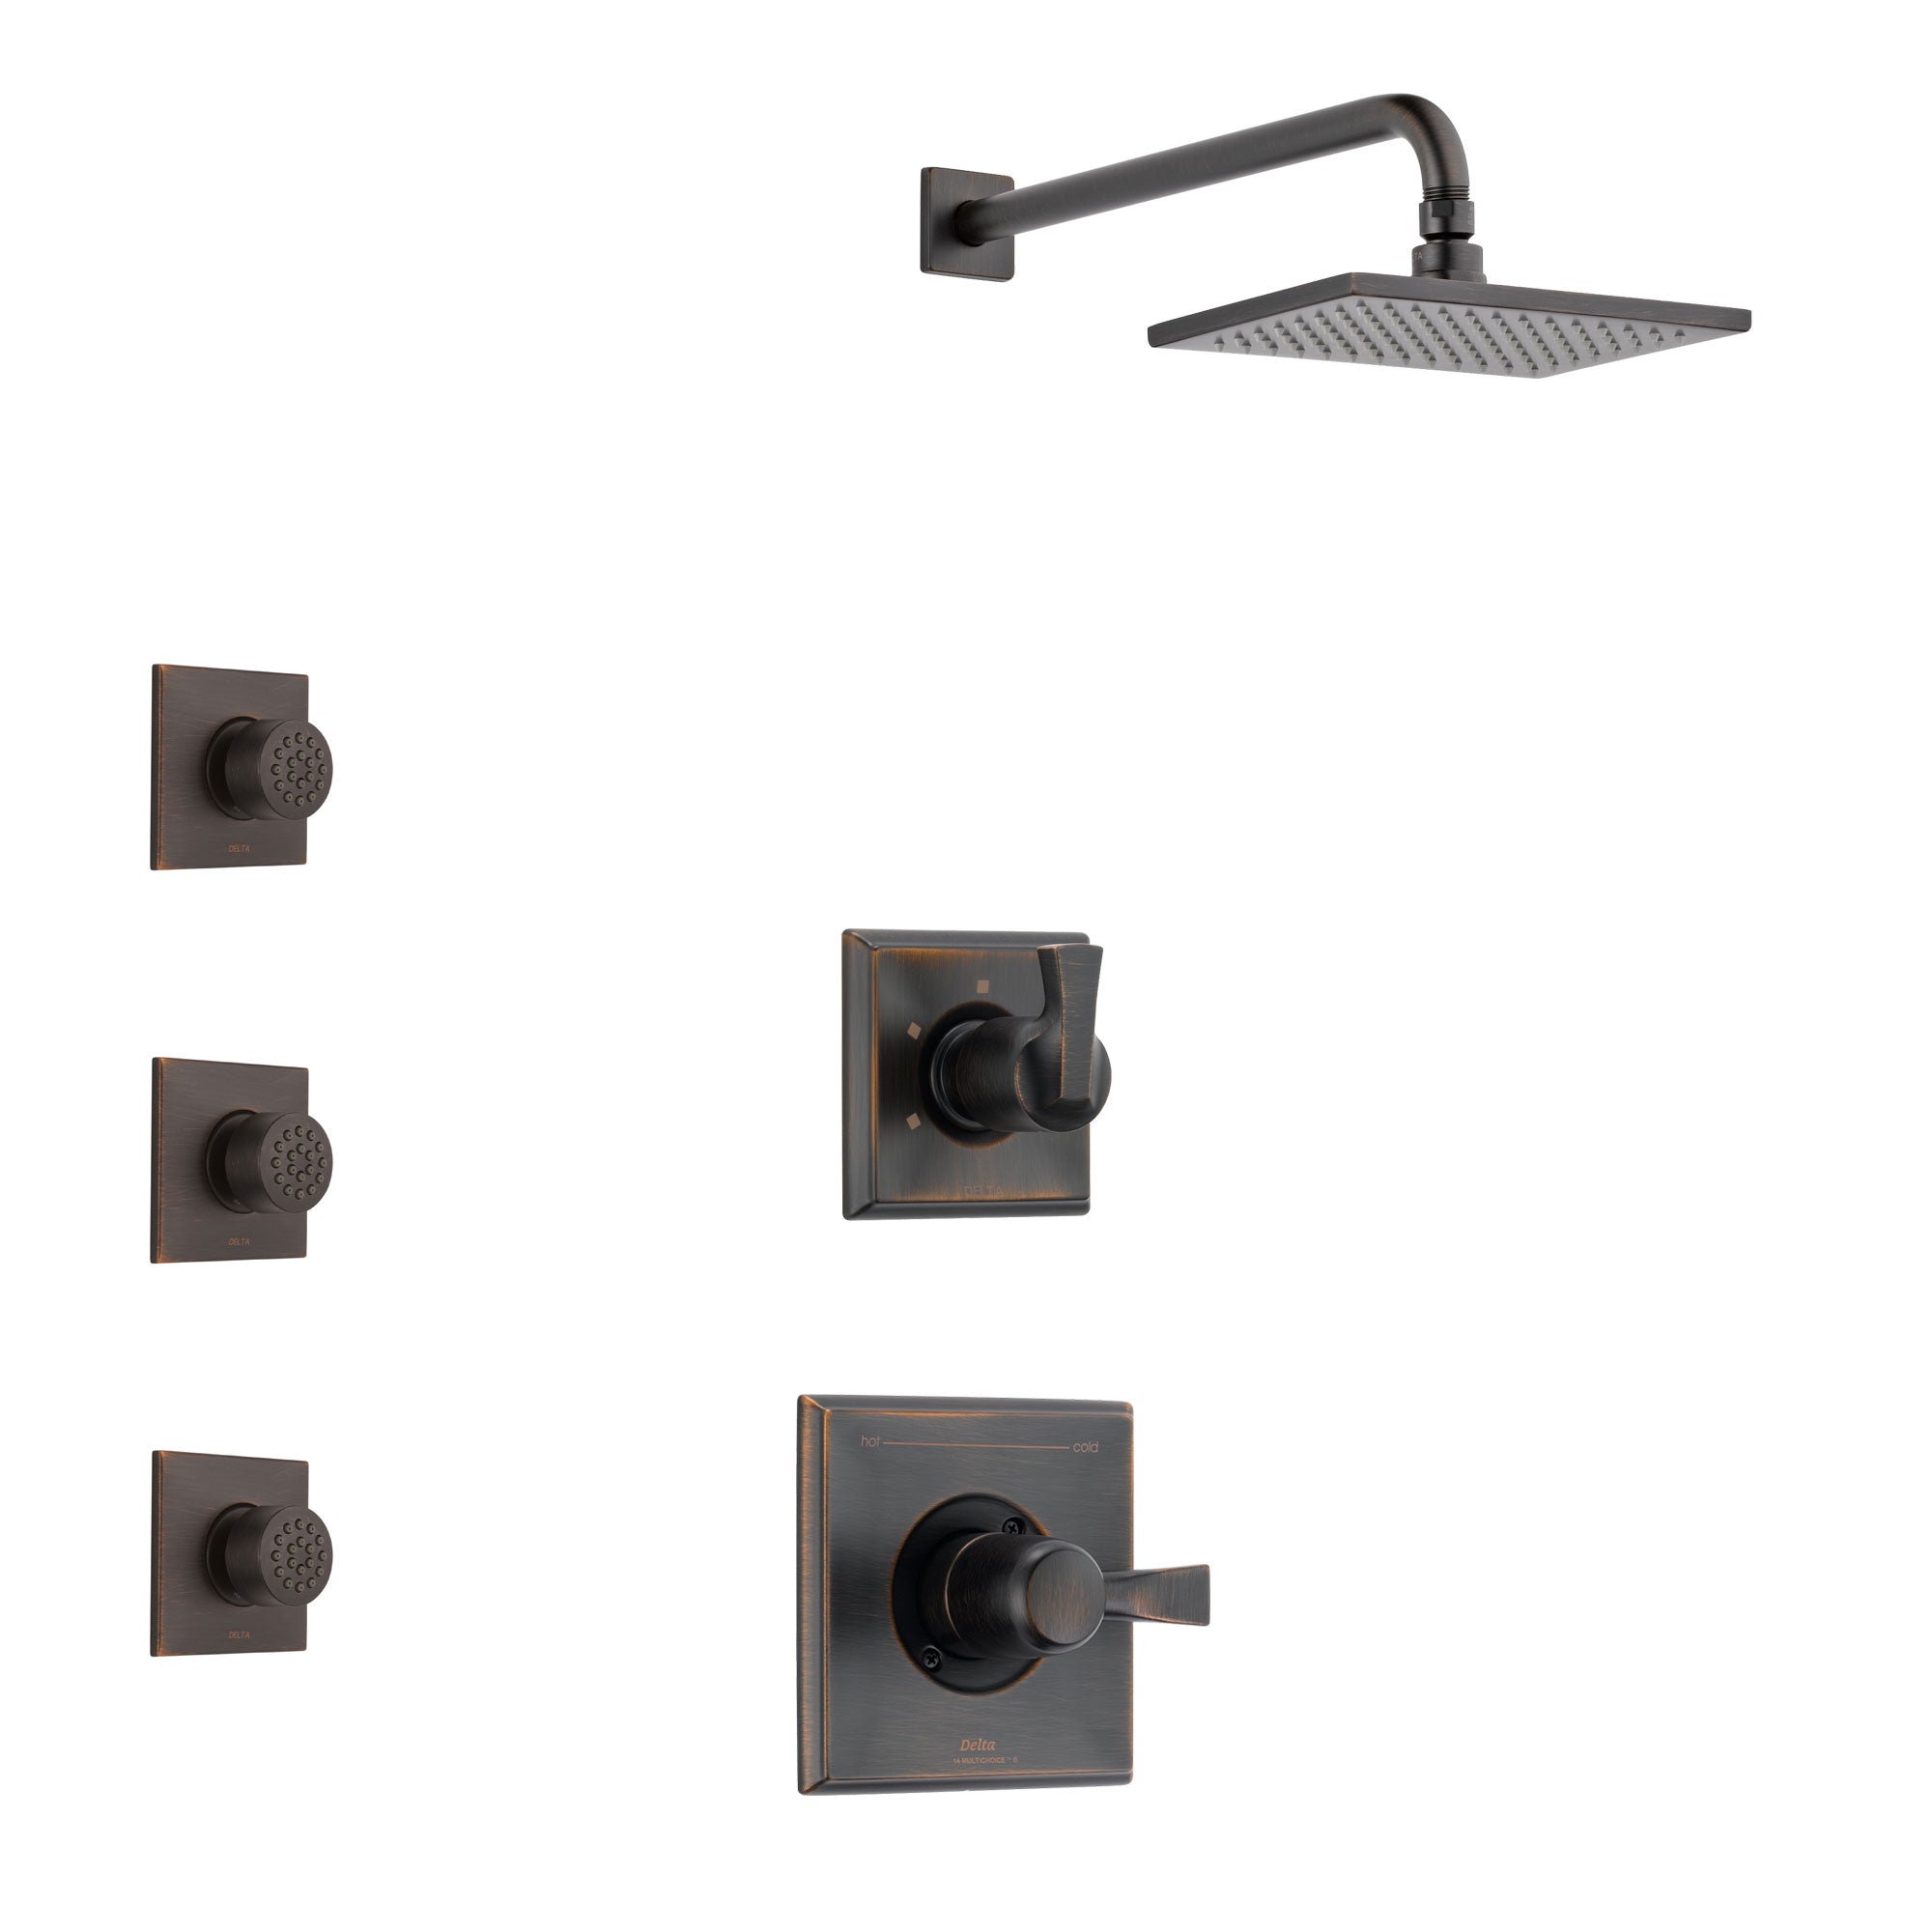 Delta Dryden Venetian Bronze Finish Shower System with Control Handle, 3-Setting Diverter, Showerhead, and 3 Body Sprays SS1451RB7